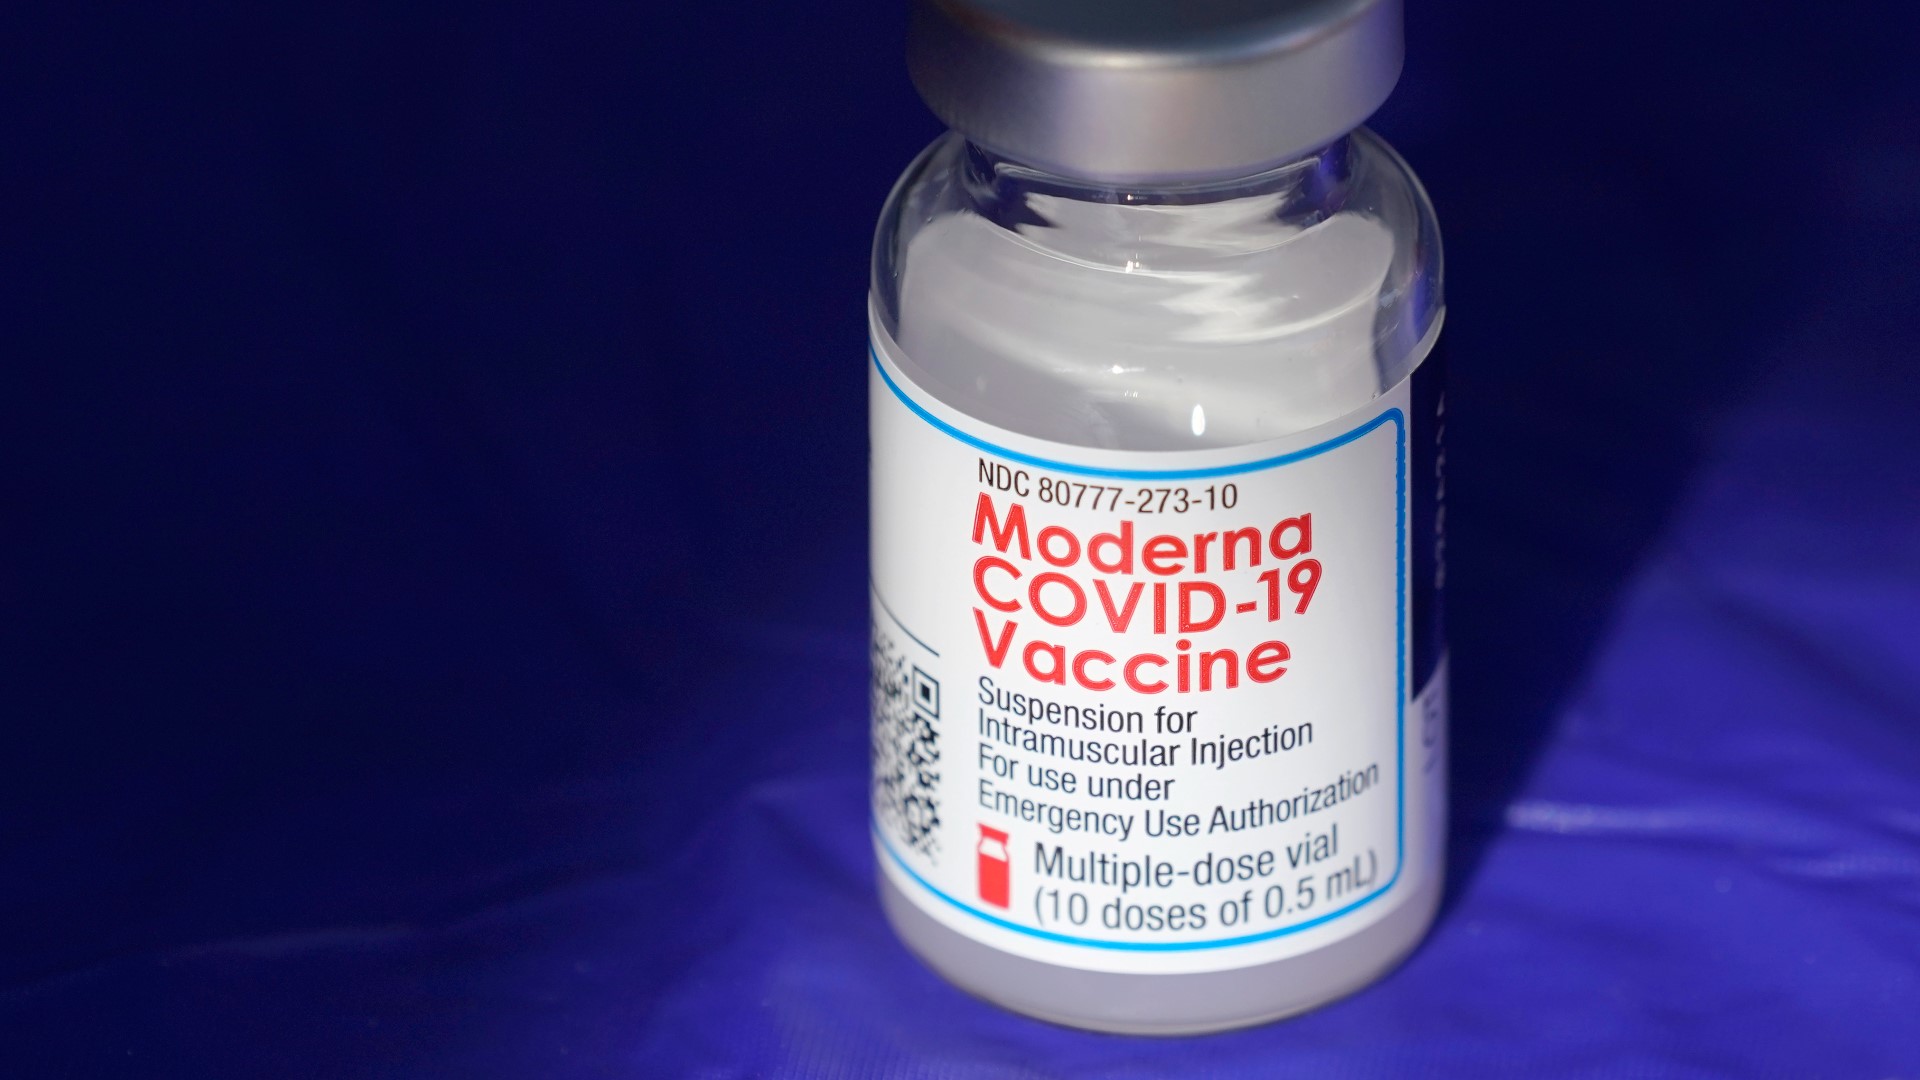 The FDA is considering authorization for Moderna's COVID-19 booster shot, which could give millions of Americans the opportunity to get an extra dose.